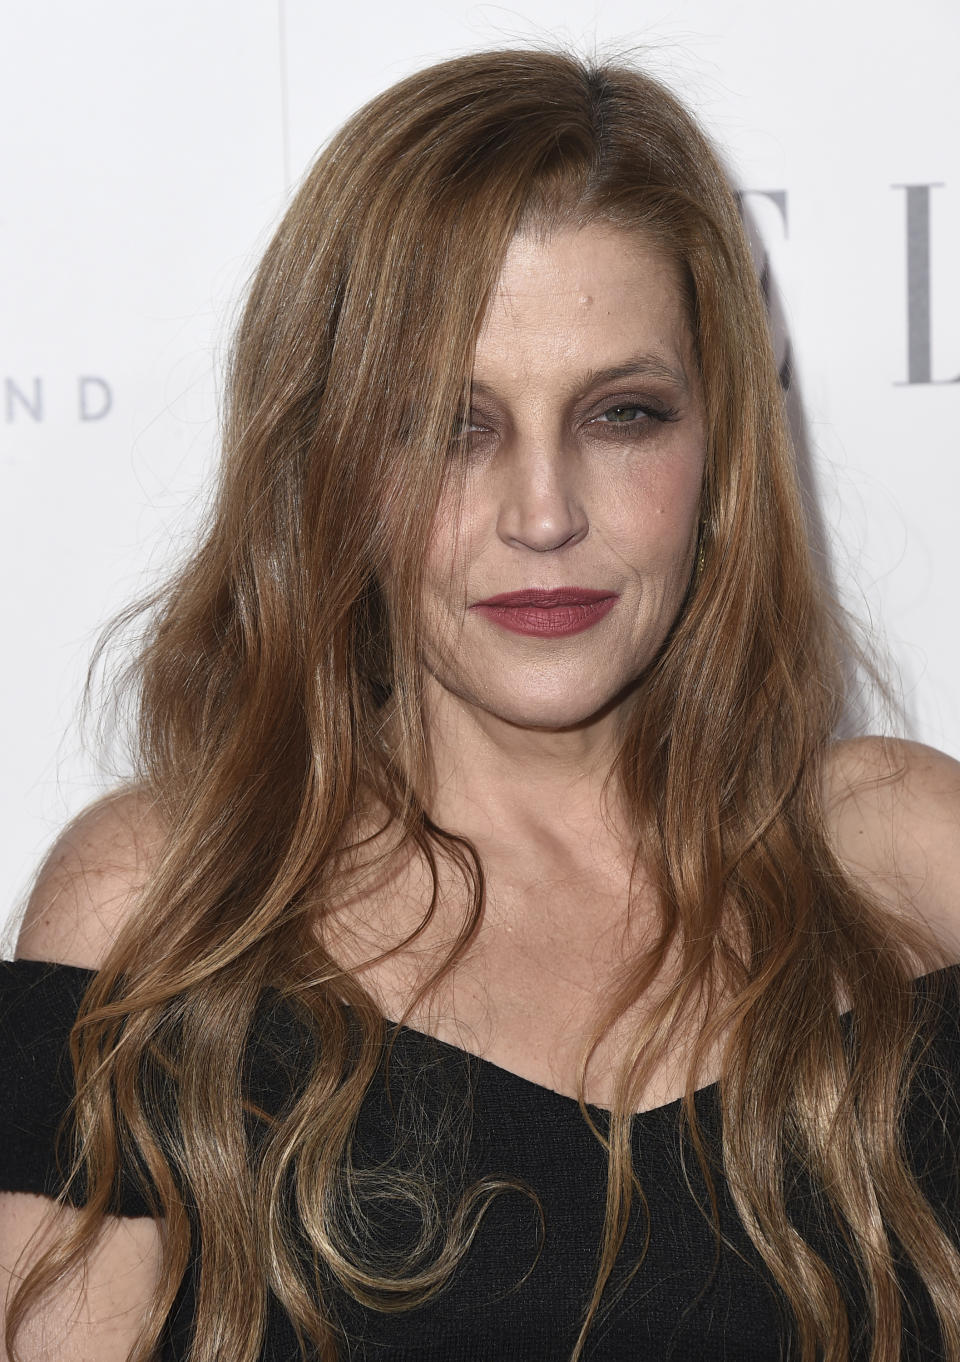 FILE - Lisa Marie Presley arrives at the 24th annual ELLE Women in Hollywood Awards at the Four Seasons Hotel Beverly Hills on Oct. 16, 2017, in Los Angeles. Presley, singer and only child of Elvis, died Thursday, Jan. 12, 2023, after a hospitalization, according to her mother, Priscilla Presley. She was 54. (Photo by Jordan Strauss/Invision/AP, File)